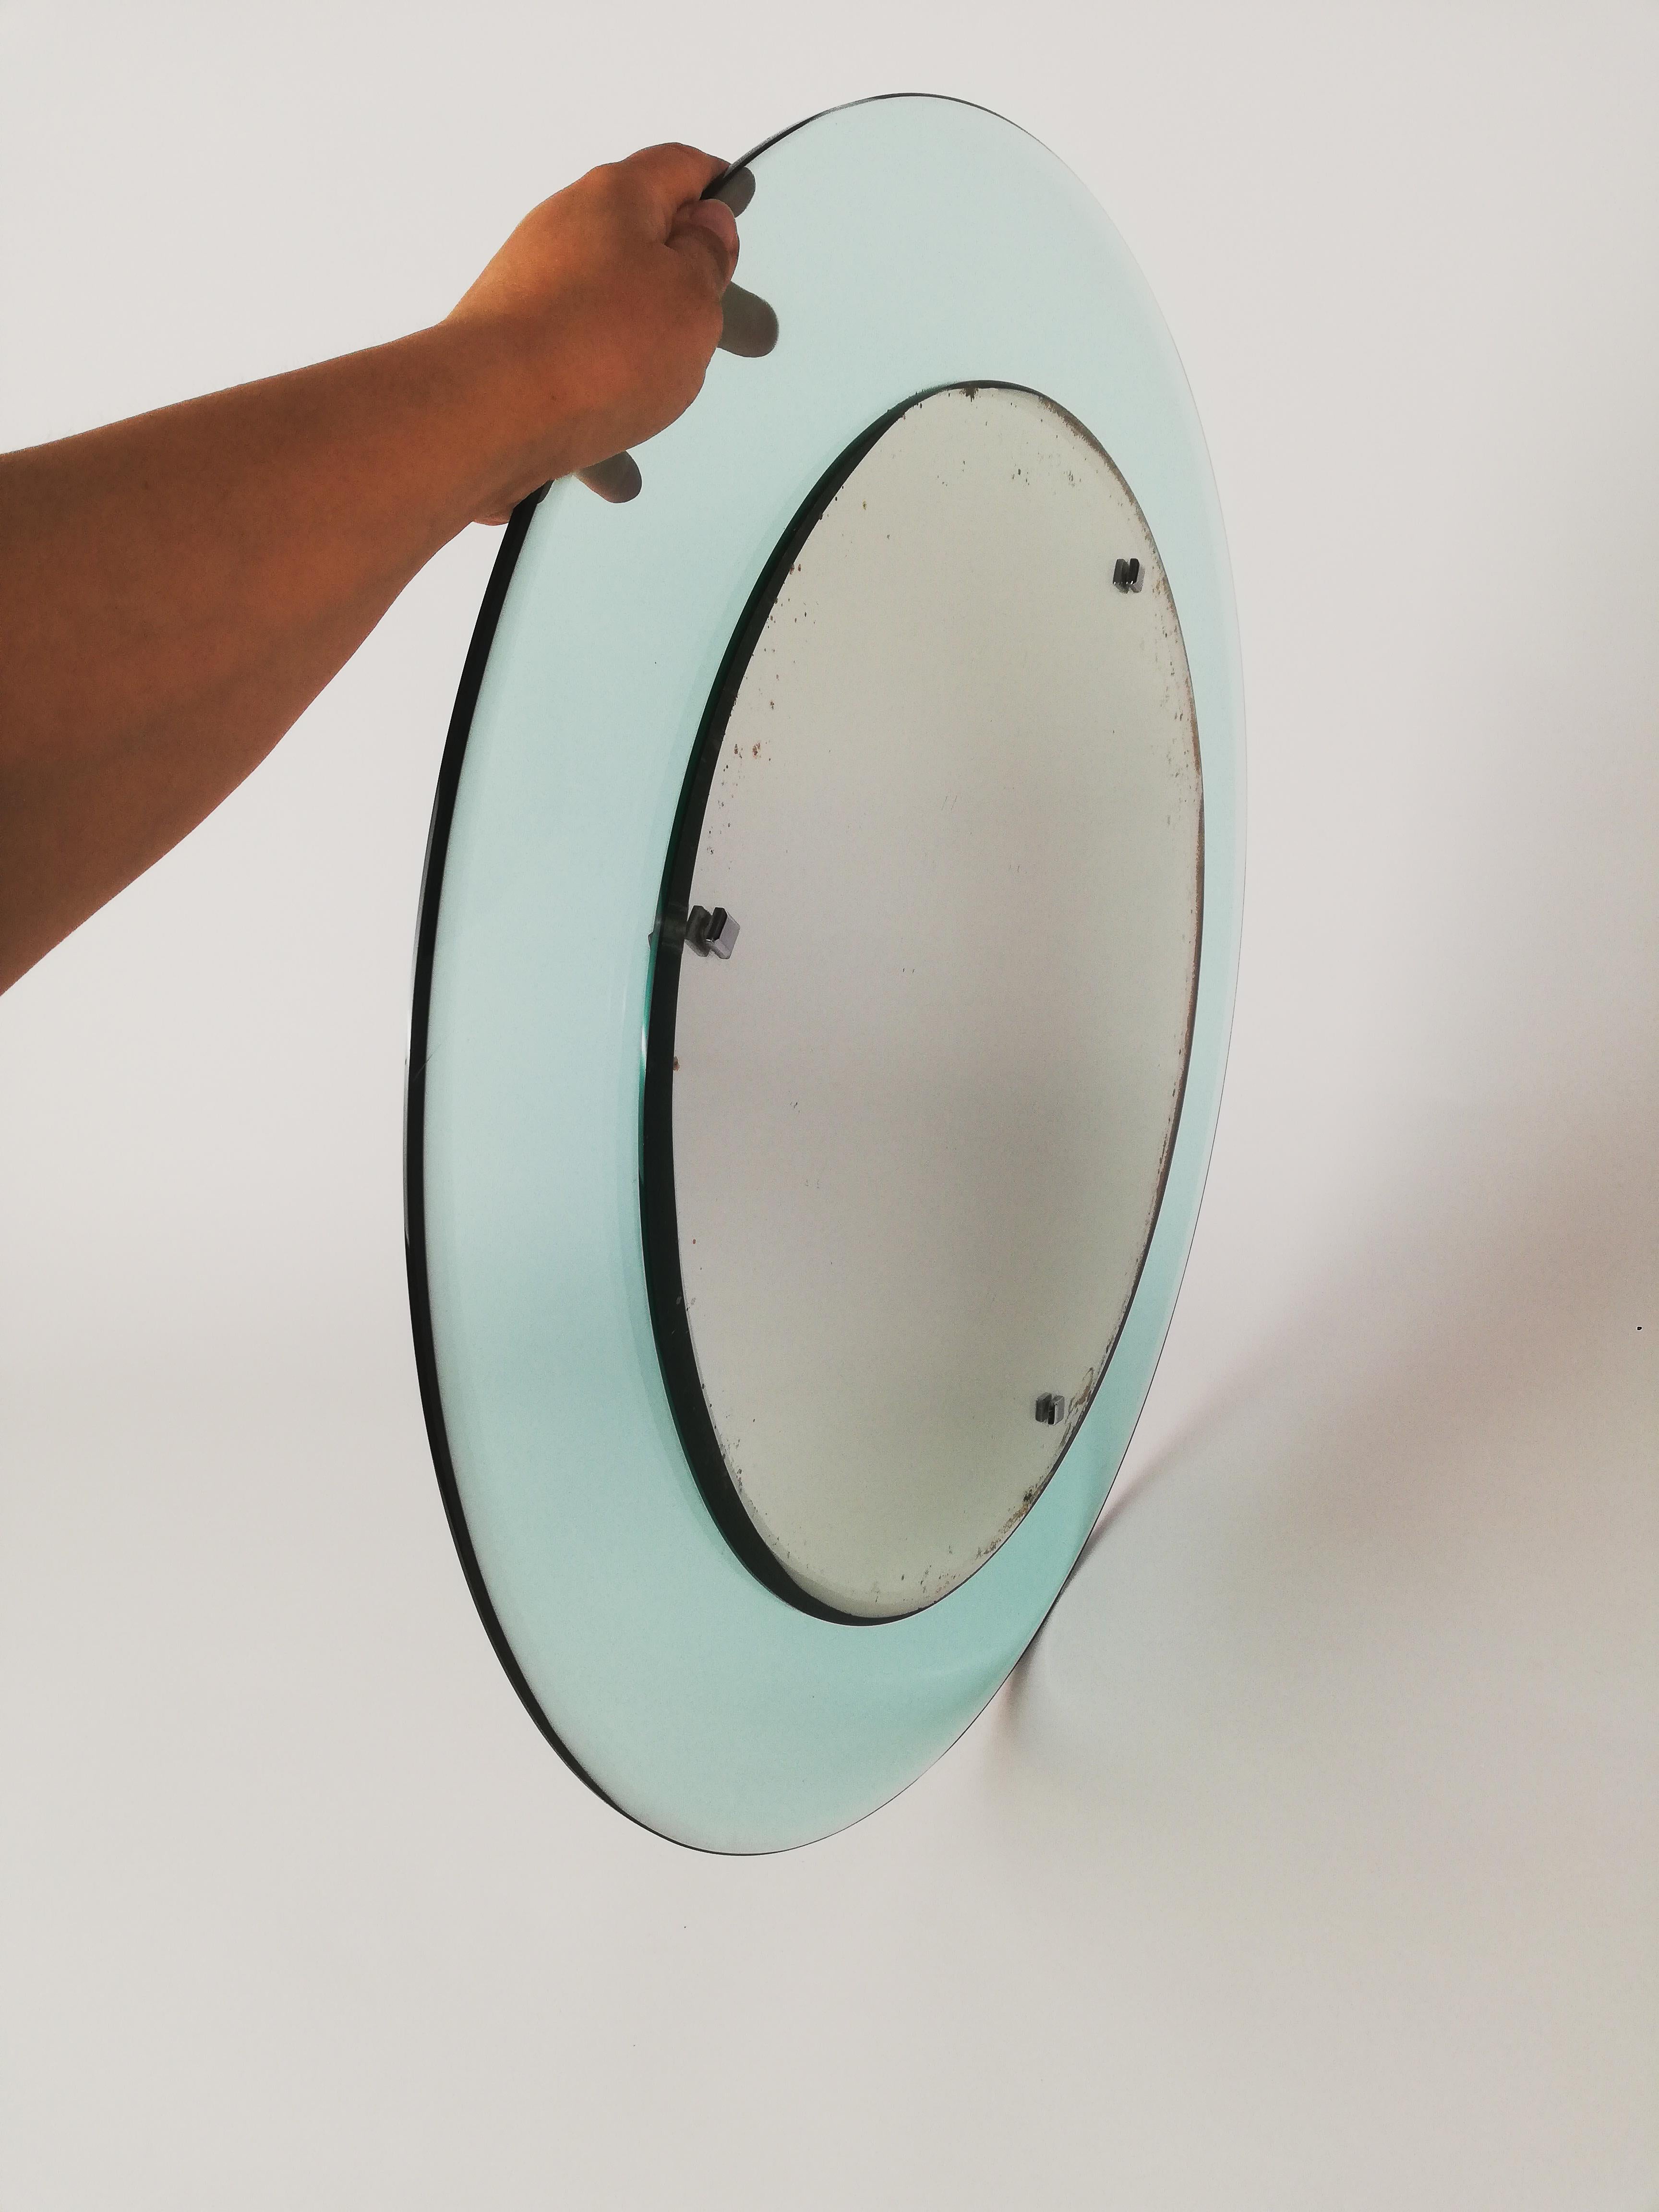 Midcentury Rounded Mirror in Turquois Glass Attributable to Veca, Italy, 1970s For Sale 3